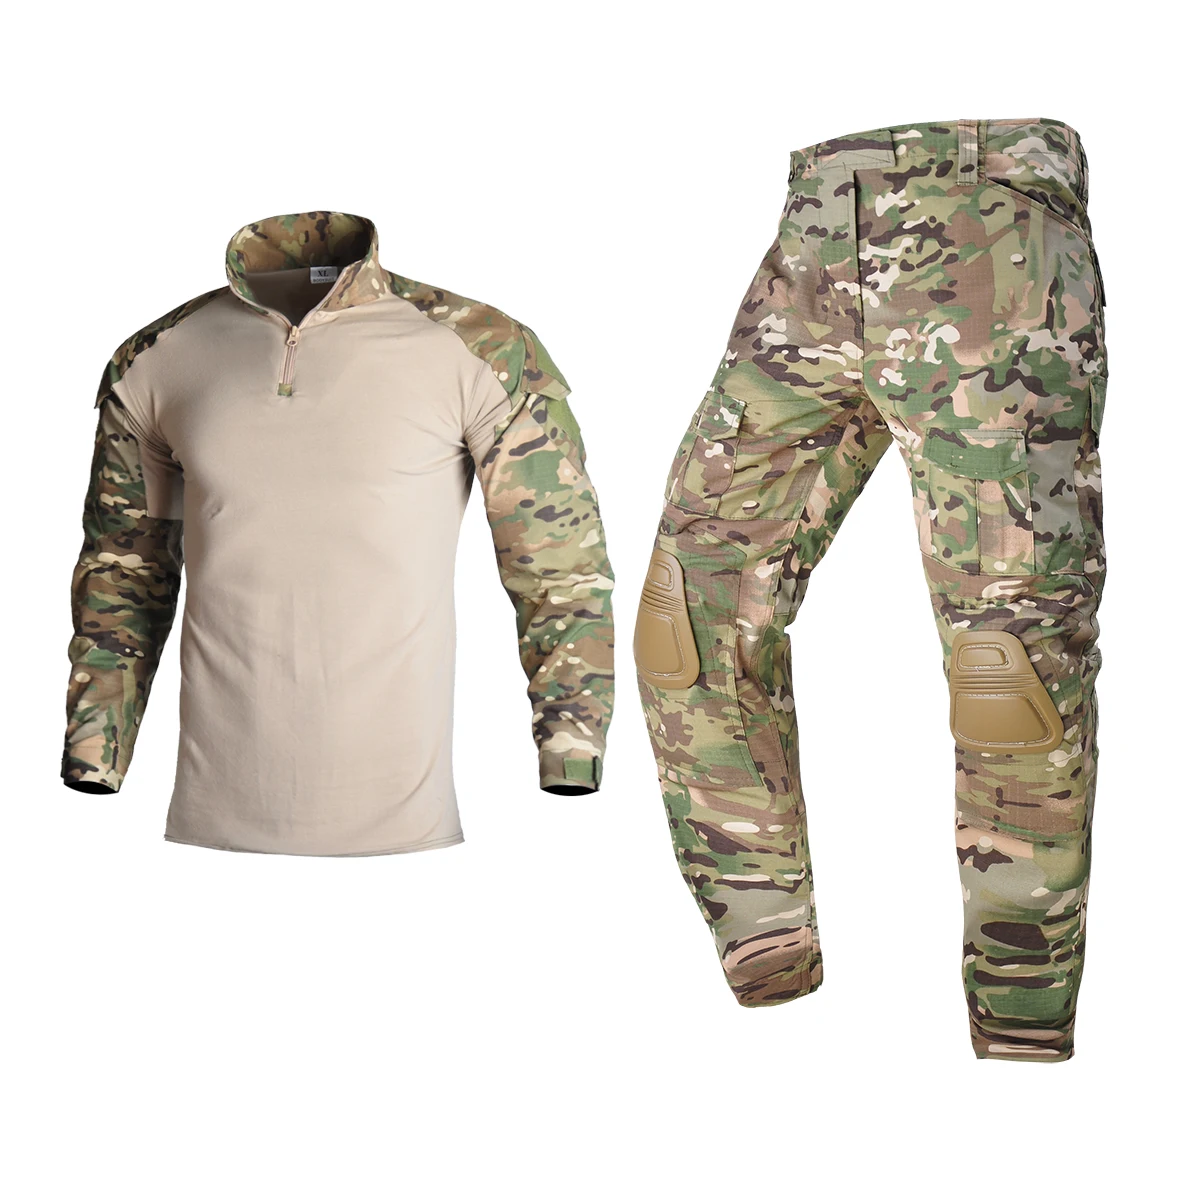 Airsoft Paintball Clothing T-shirt Outdoor &Pants with Pad Men Military Shooting Uniform Tactical Combat shirt camo Army Uniform